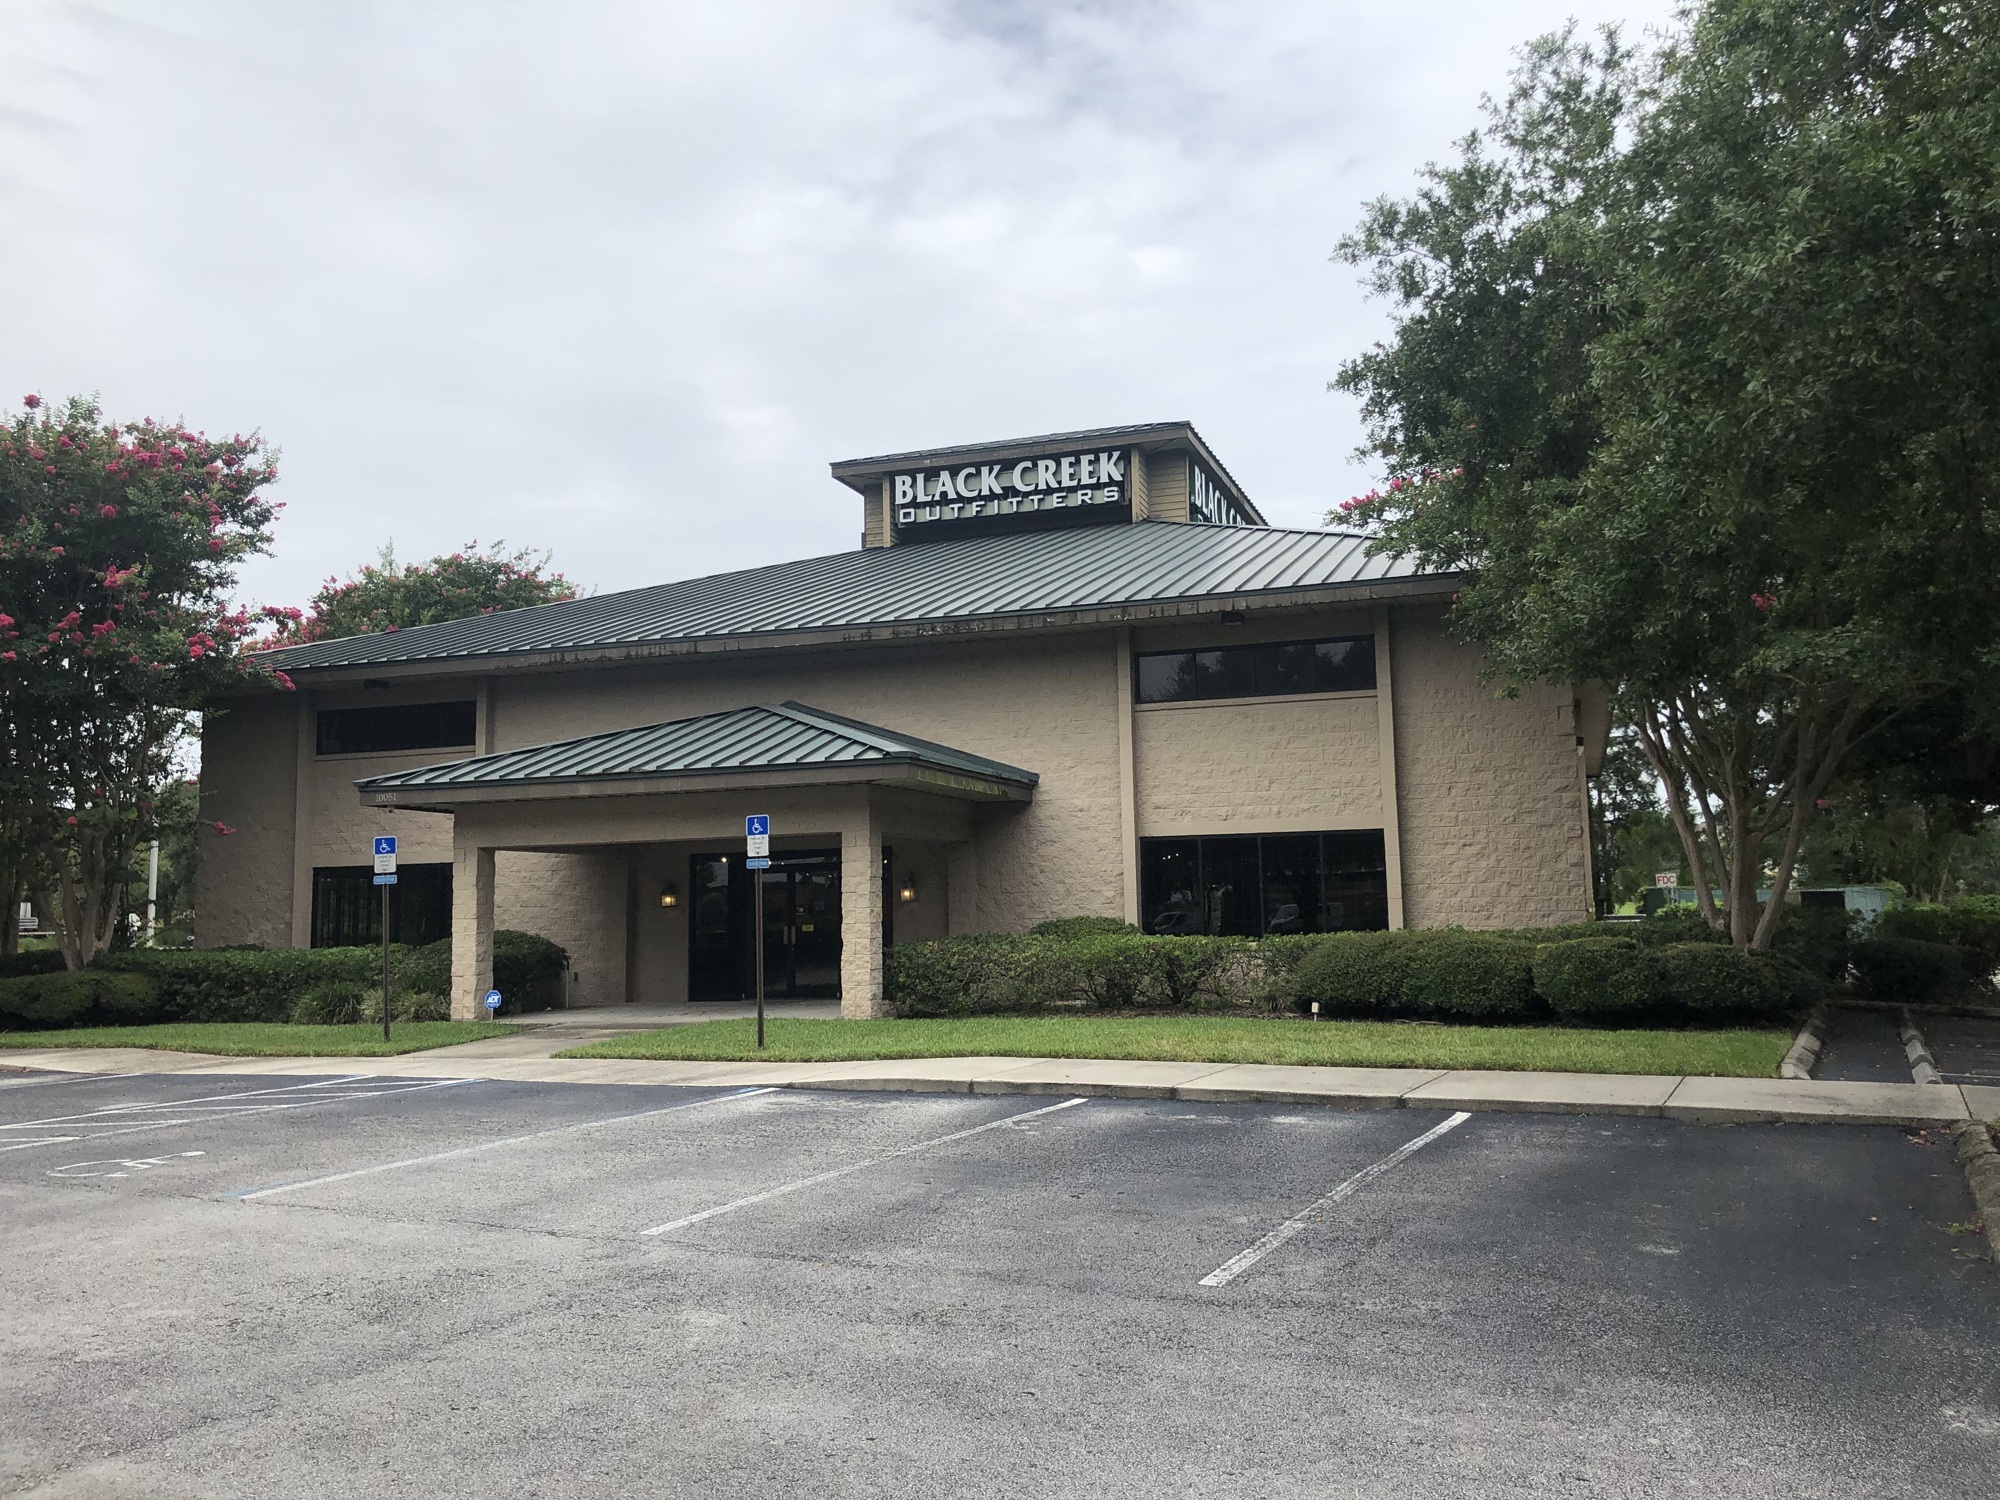 Insa Jacksonville is planned at 10051 Skinner Lake Drive near St. Johns Town Center. It is the former Black Creek Outfitters building.